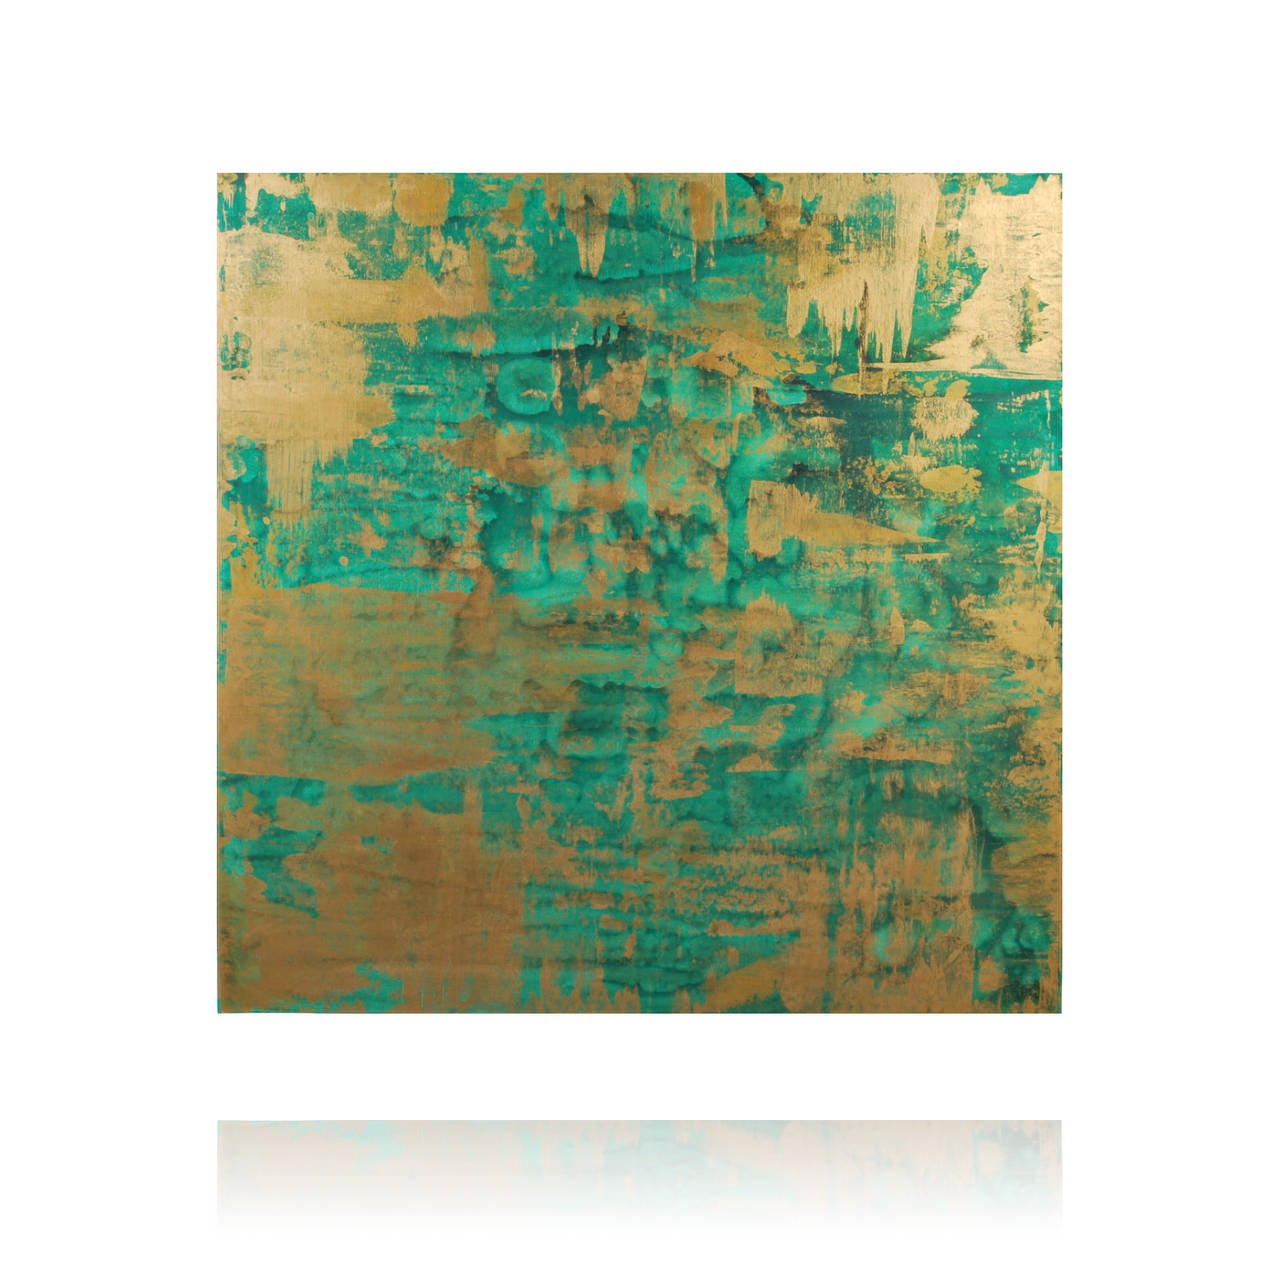 Marvelous mixed media abstract painting in Malachite green and metallic gold. This is an original painting on board, signed by the artist and dated on the reverse. Like other abstract paintings by this artist, you can show the artwork vertical or